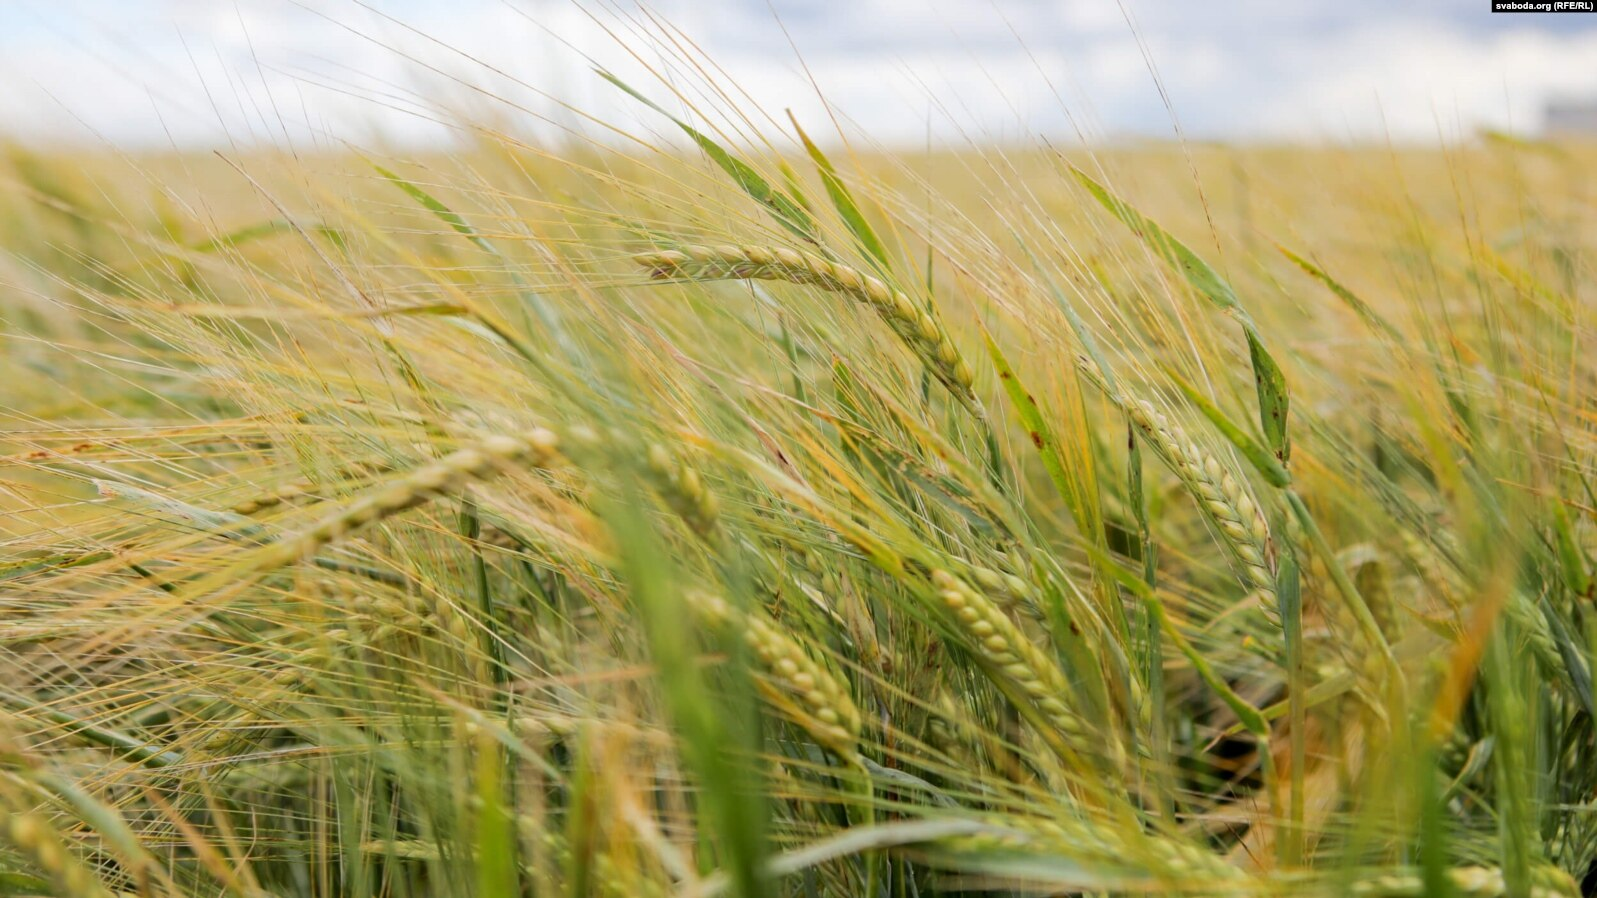 The EU introduces the sixth package of sanctions against Belarus amid discussion of a transit scheme for Ukrainian grain